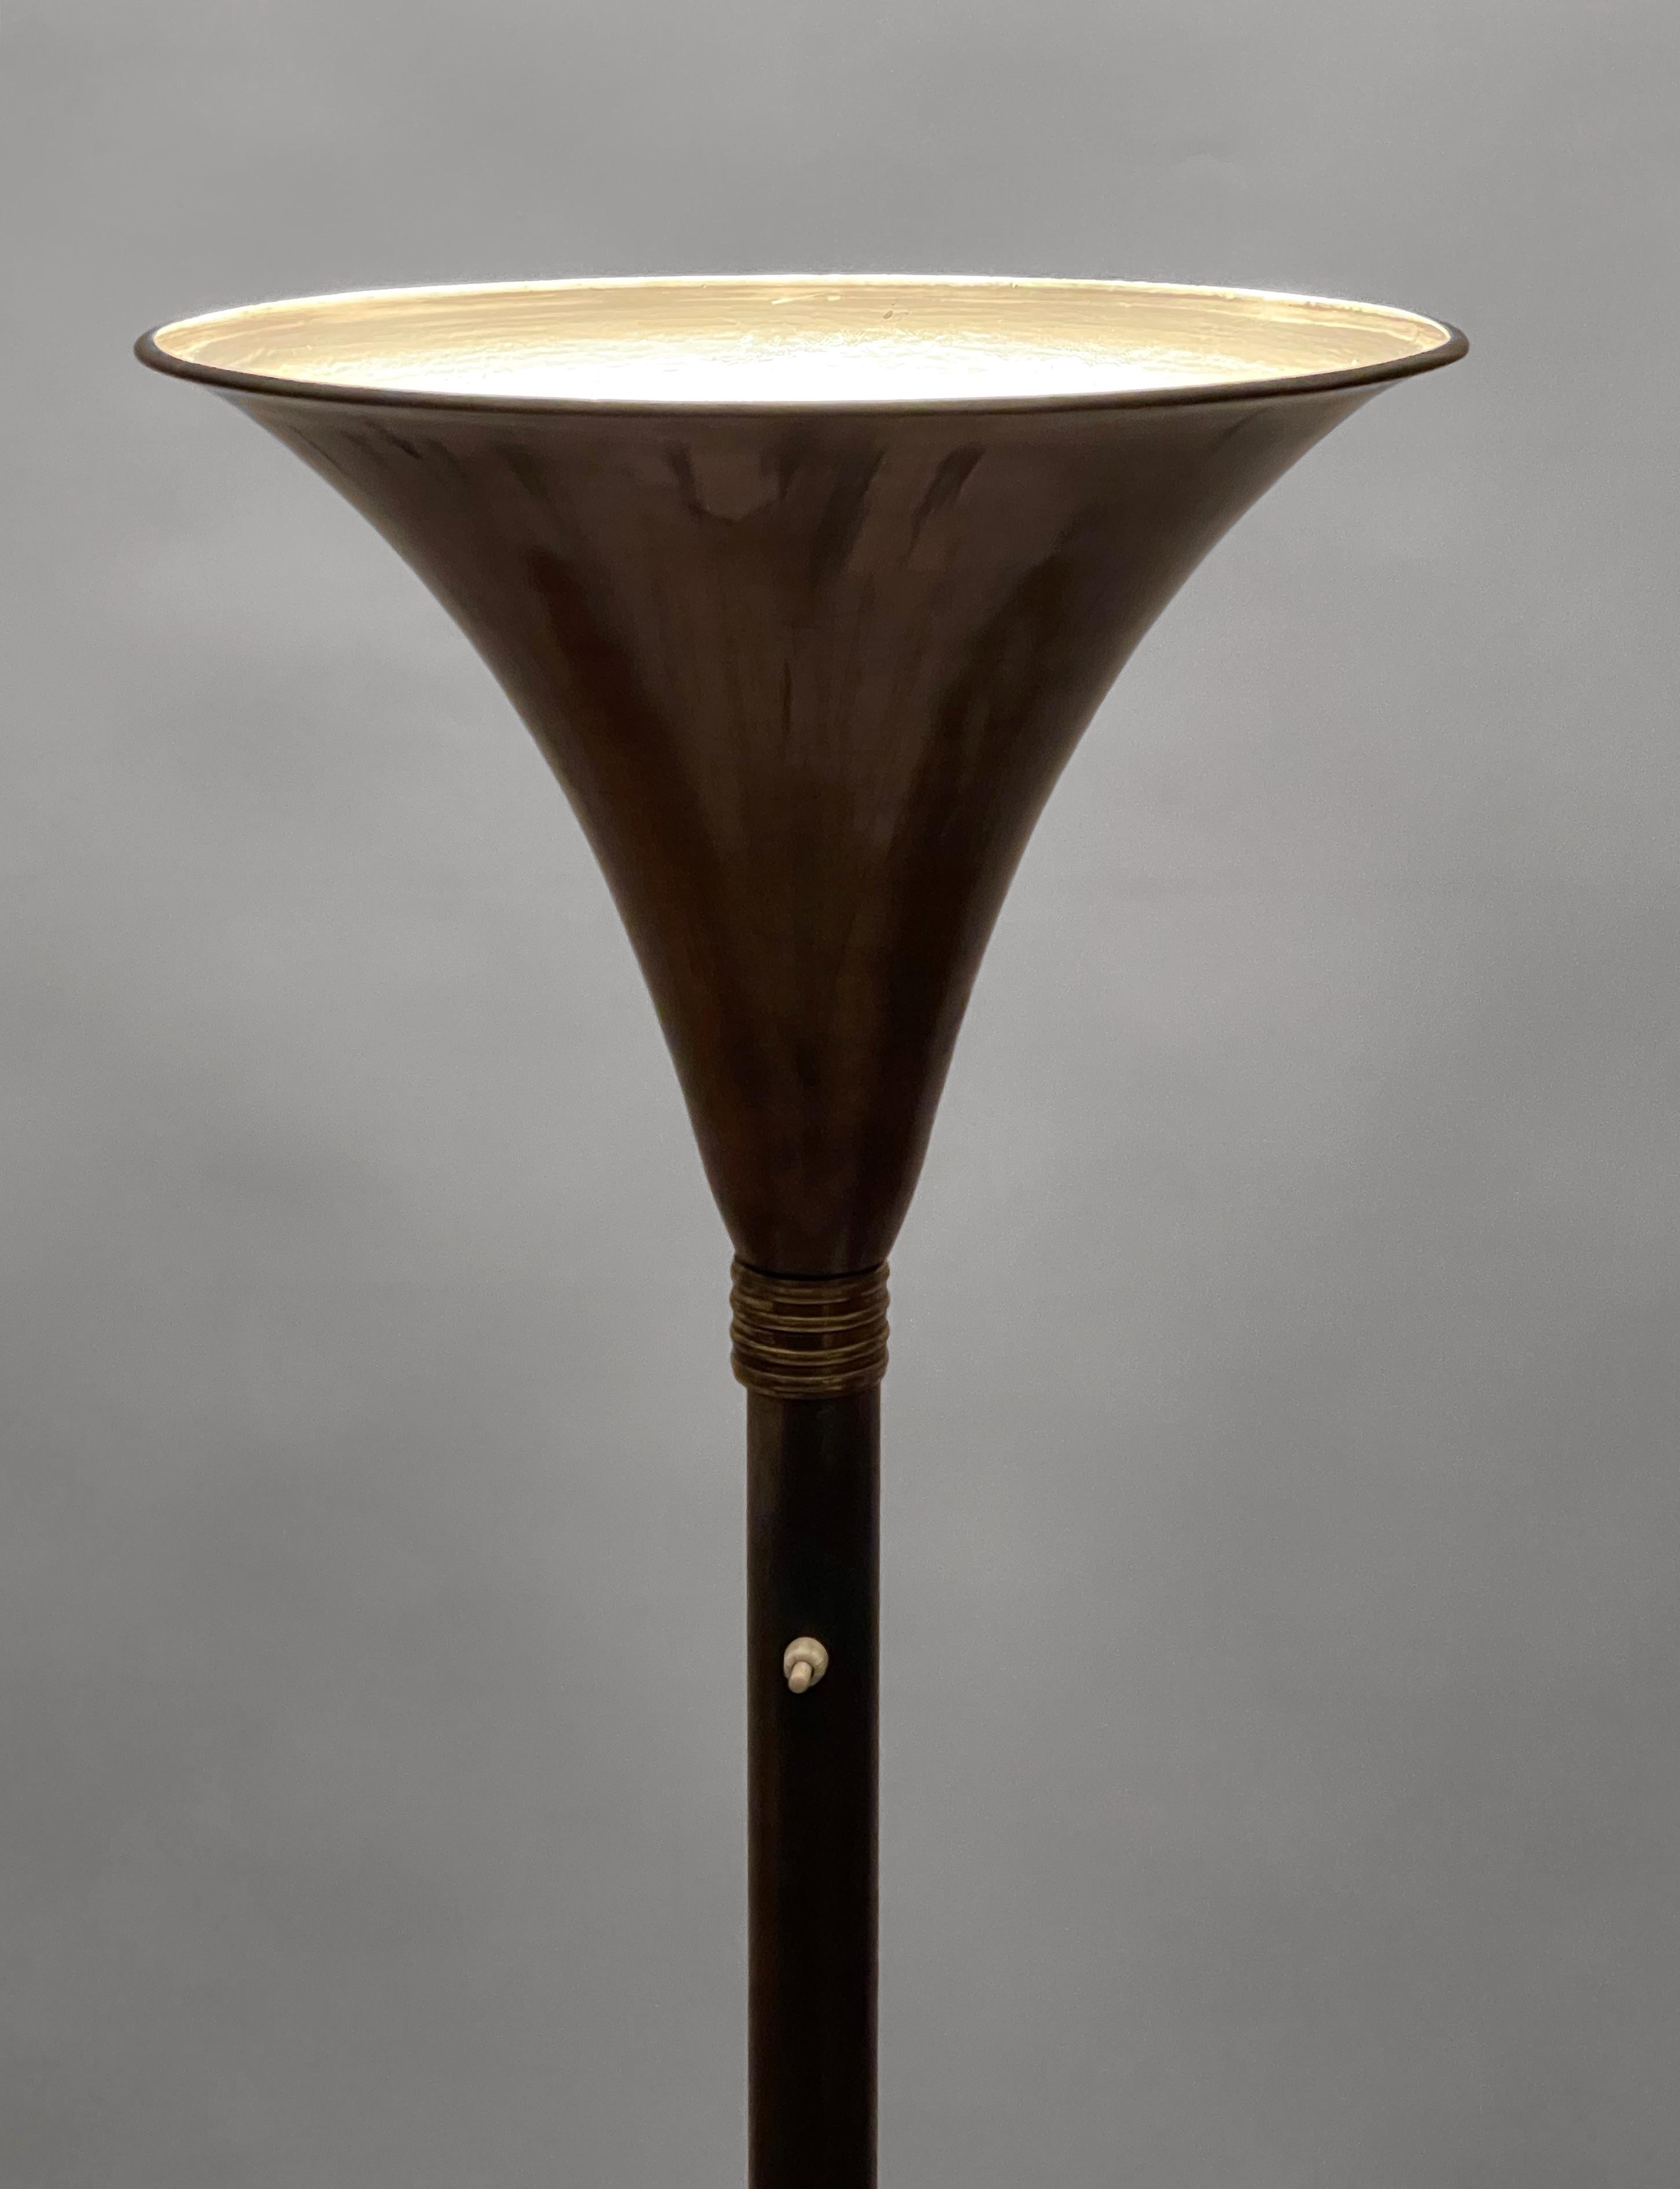 Art Deco Bronzed Metal and Brass Italian Floor Lamp after Pietro Chiesa, 1940s For Sale 8